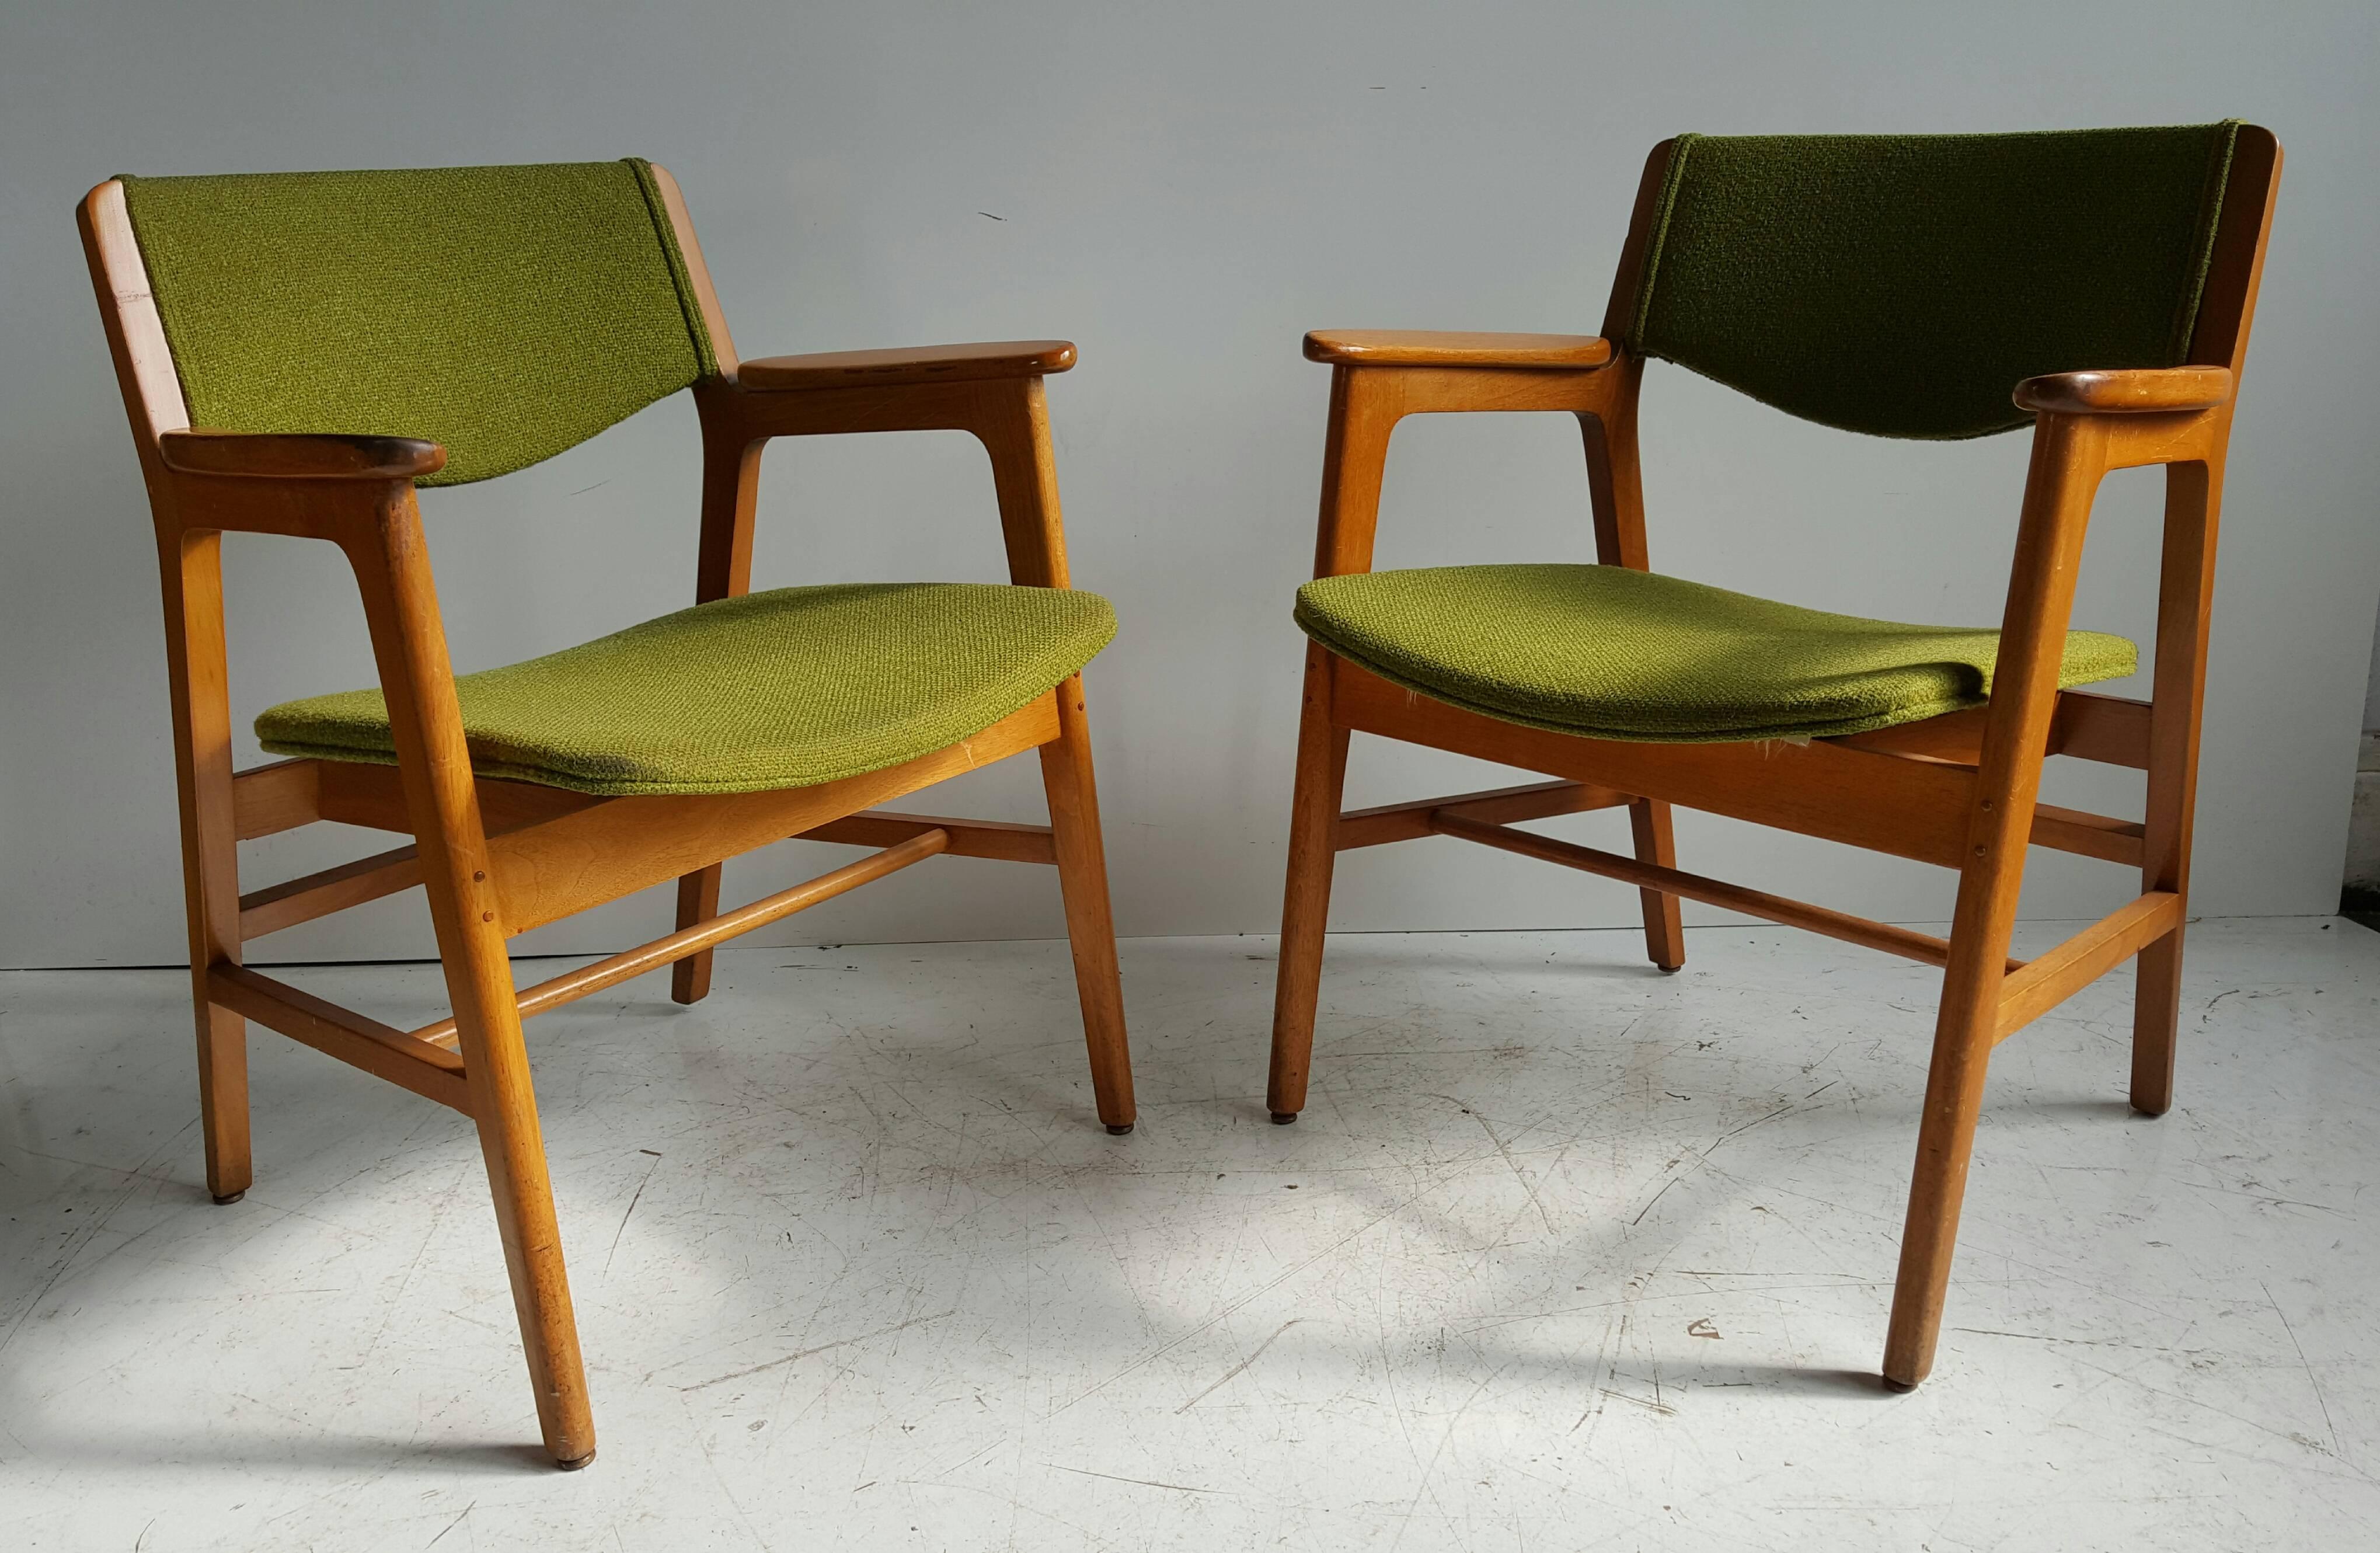 Classic Mid-Century Modern armchairs, manufactured by Gunlocke. Birch/maple wood frames, quality construction you come to expect with Gunlocke furniture. Chairs retain original celadon green wool fabric, great condition, total of six available,